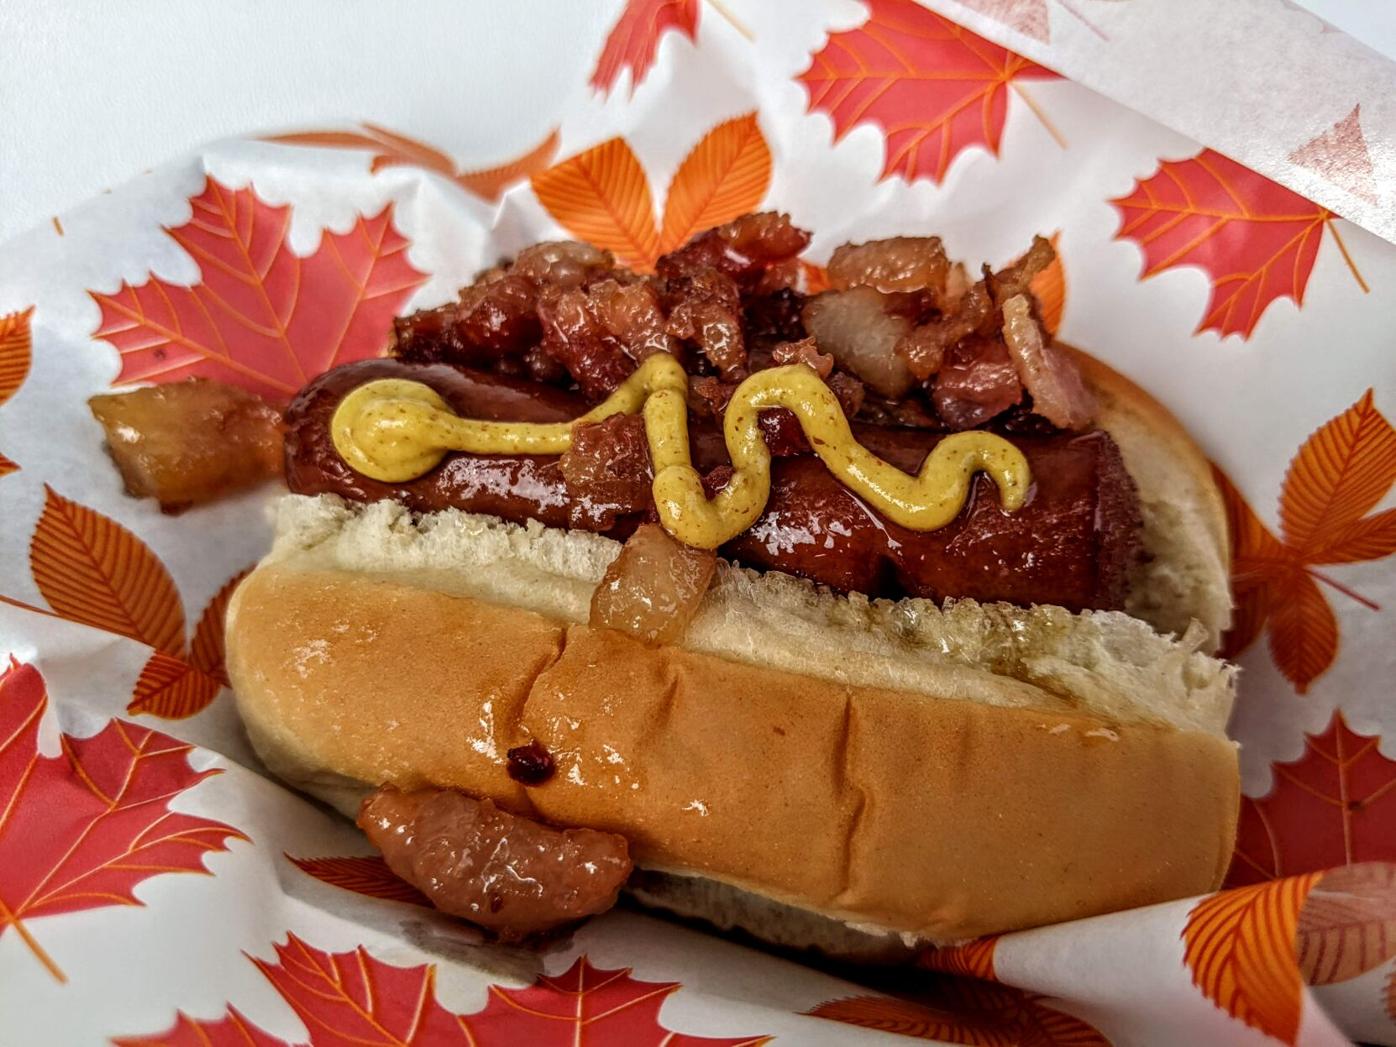 It's all about the flavor of the hot dogs': Pink's owners tour